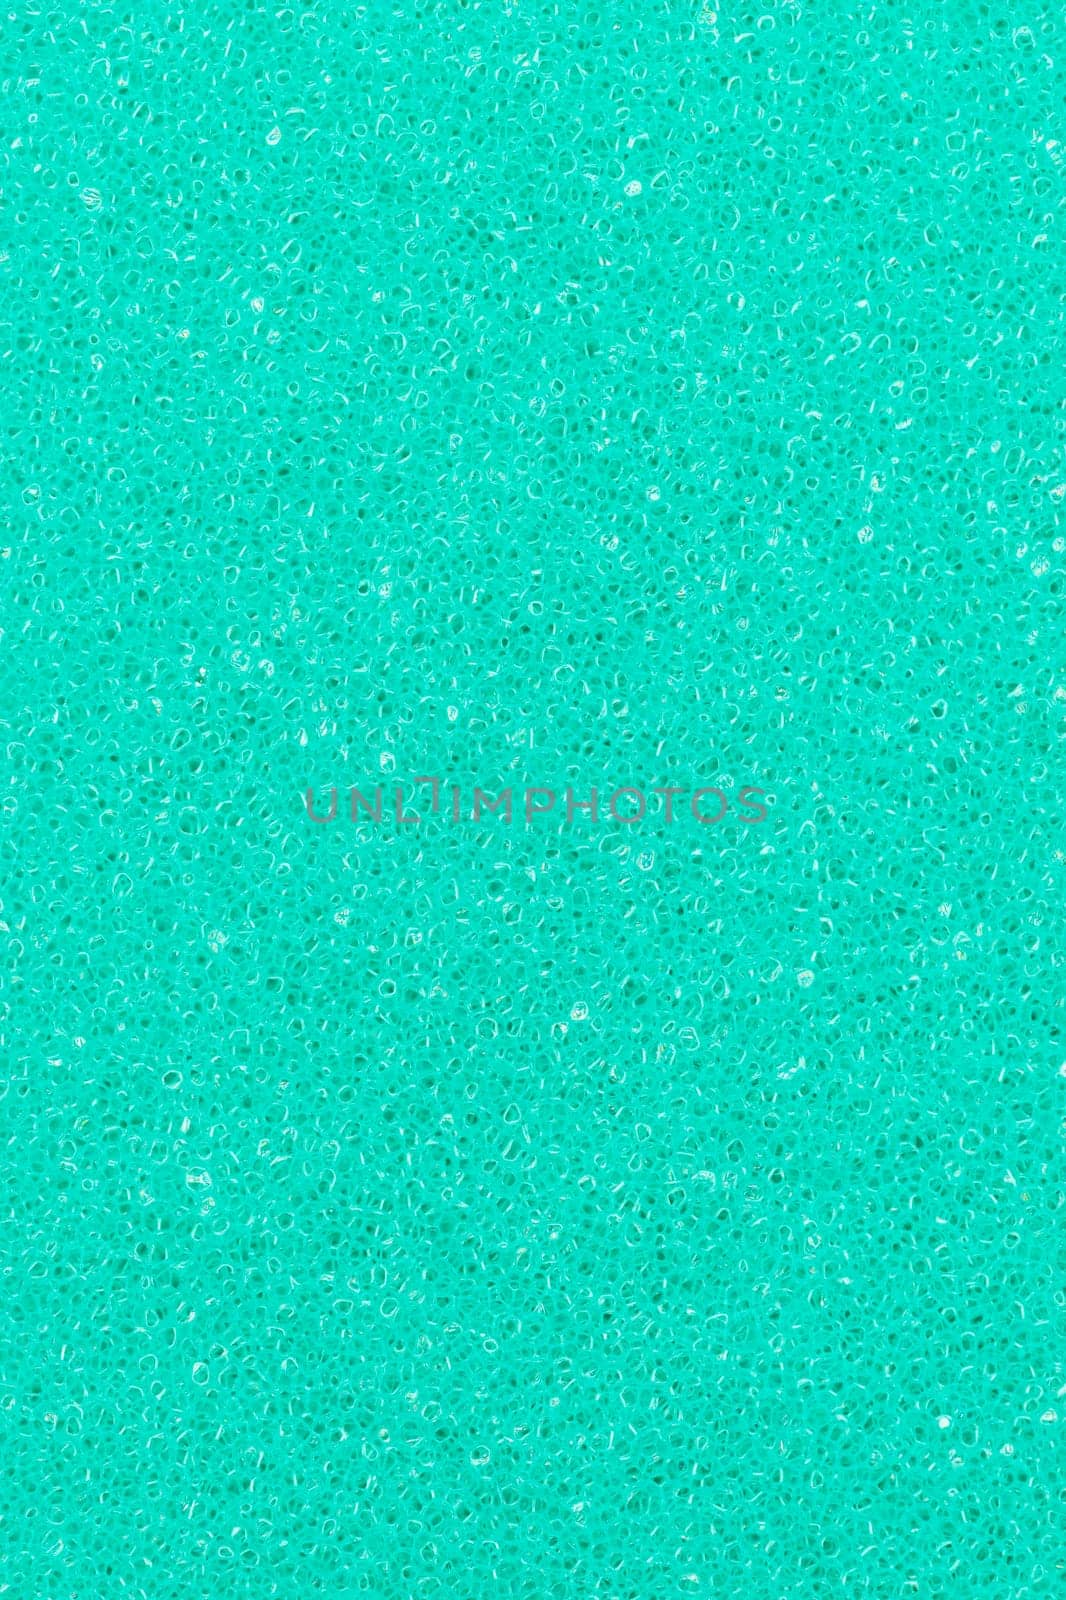 Turquoise color foam porous abstract background. Vertical composition for design, colored backdrop by Alexander-Piragis